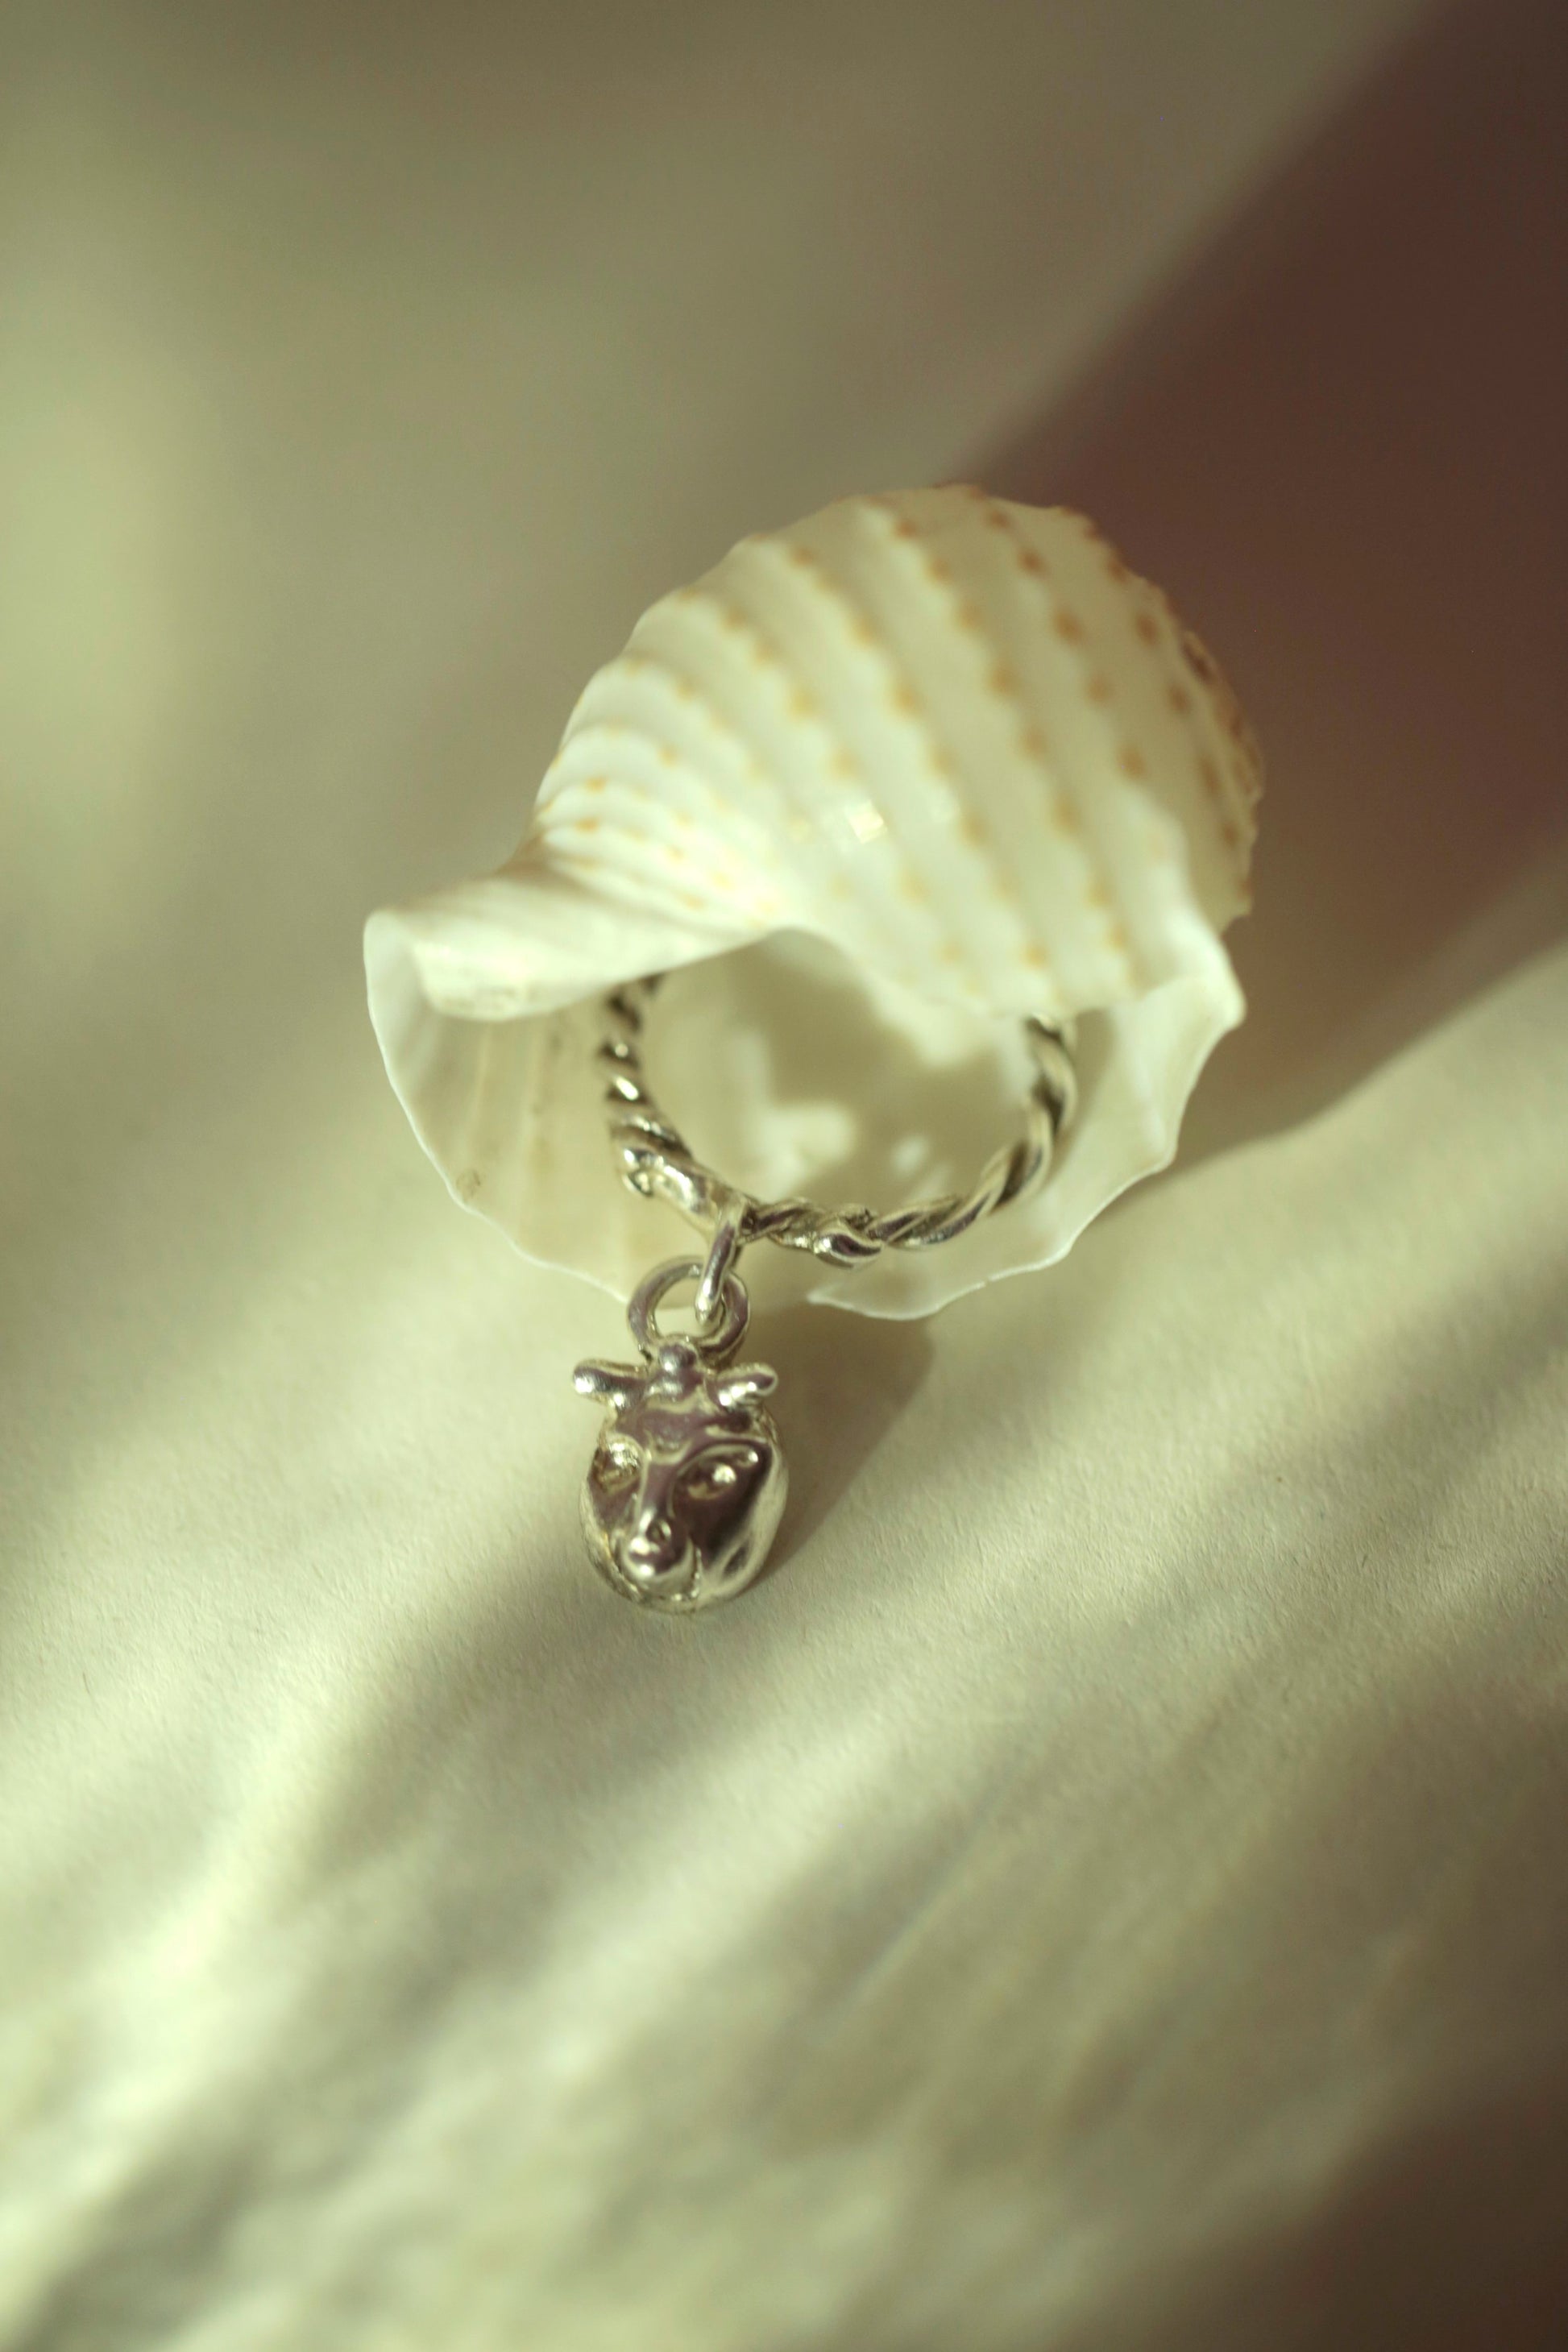 Lilith Charm Ring by CLARK in Sterling Silver. Ring is peeking out of a seashell with dappled light. This is a unique, one-of-a-kind statement ring. Handcrafted using the lost-wax-casting method.